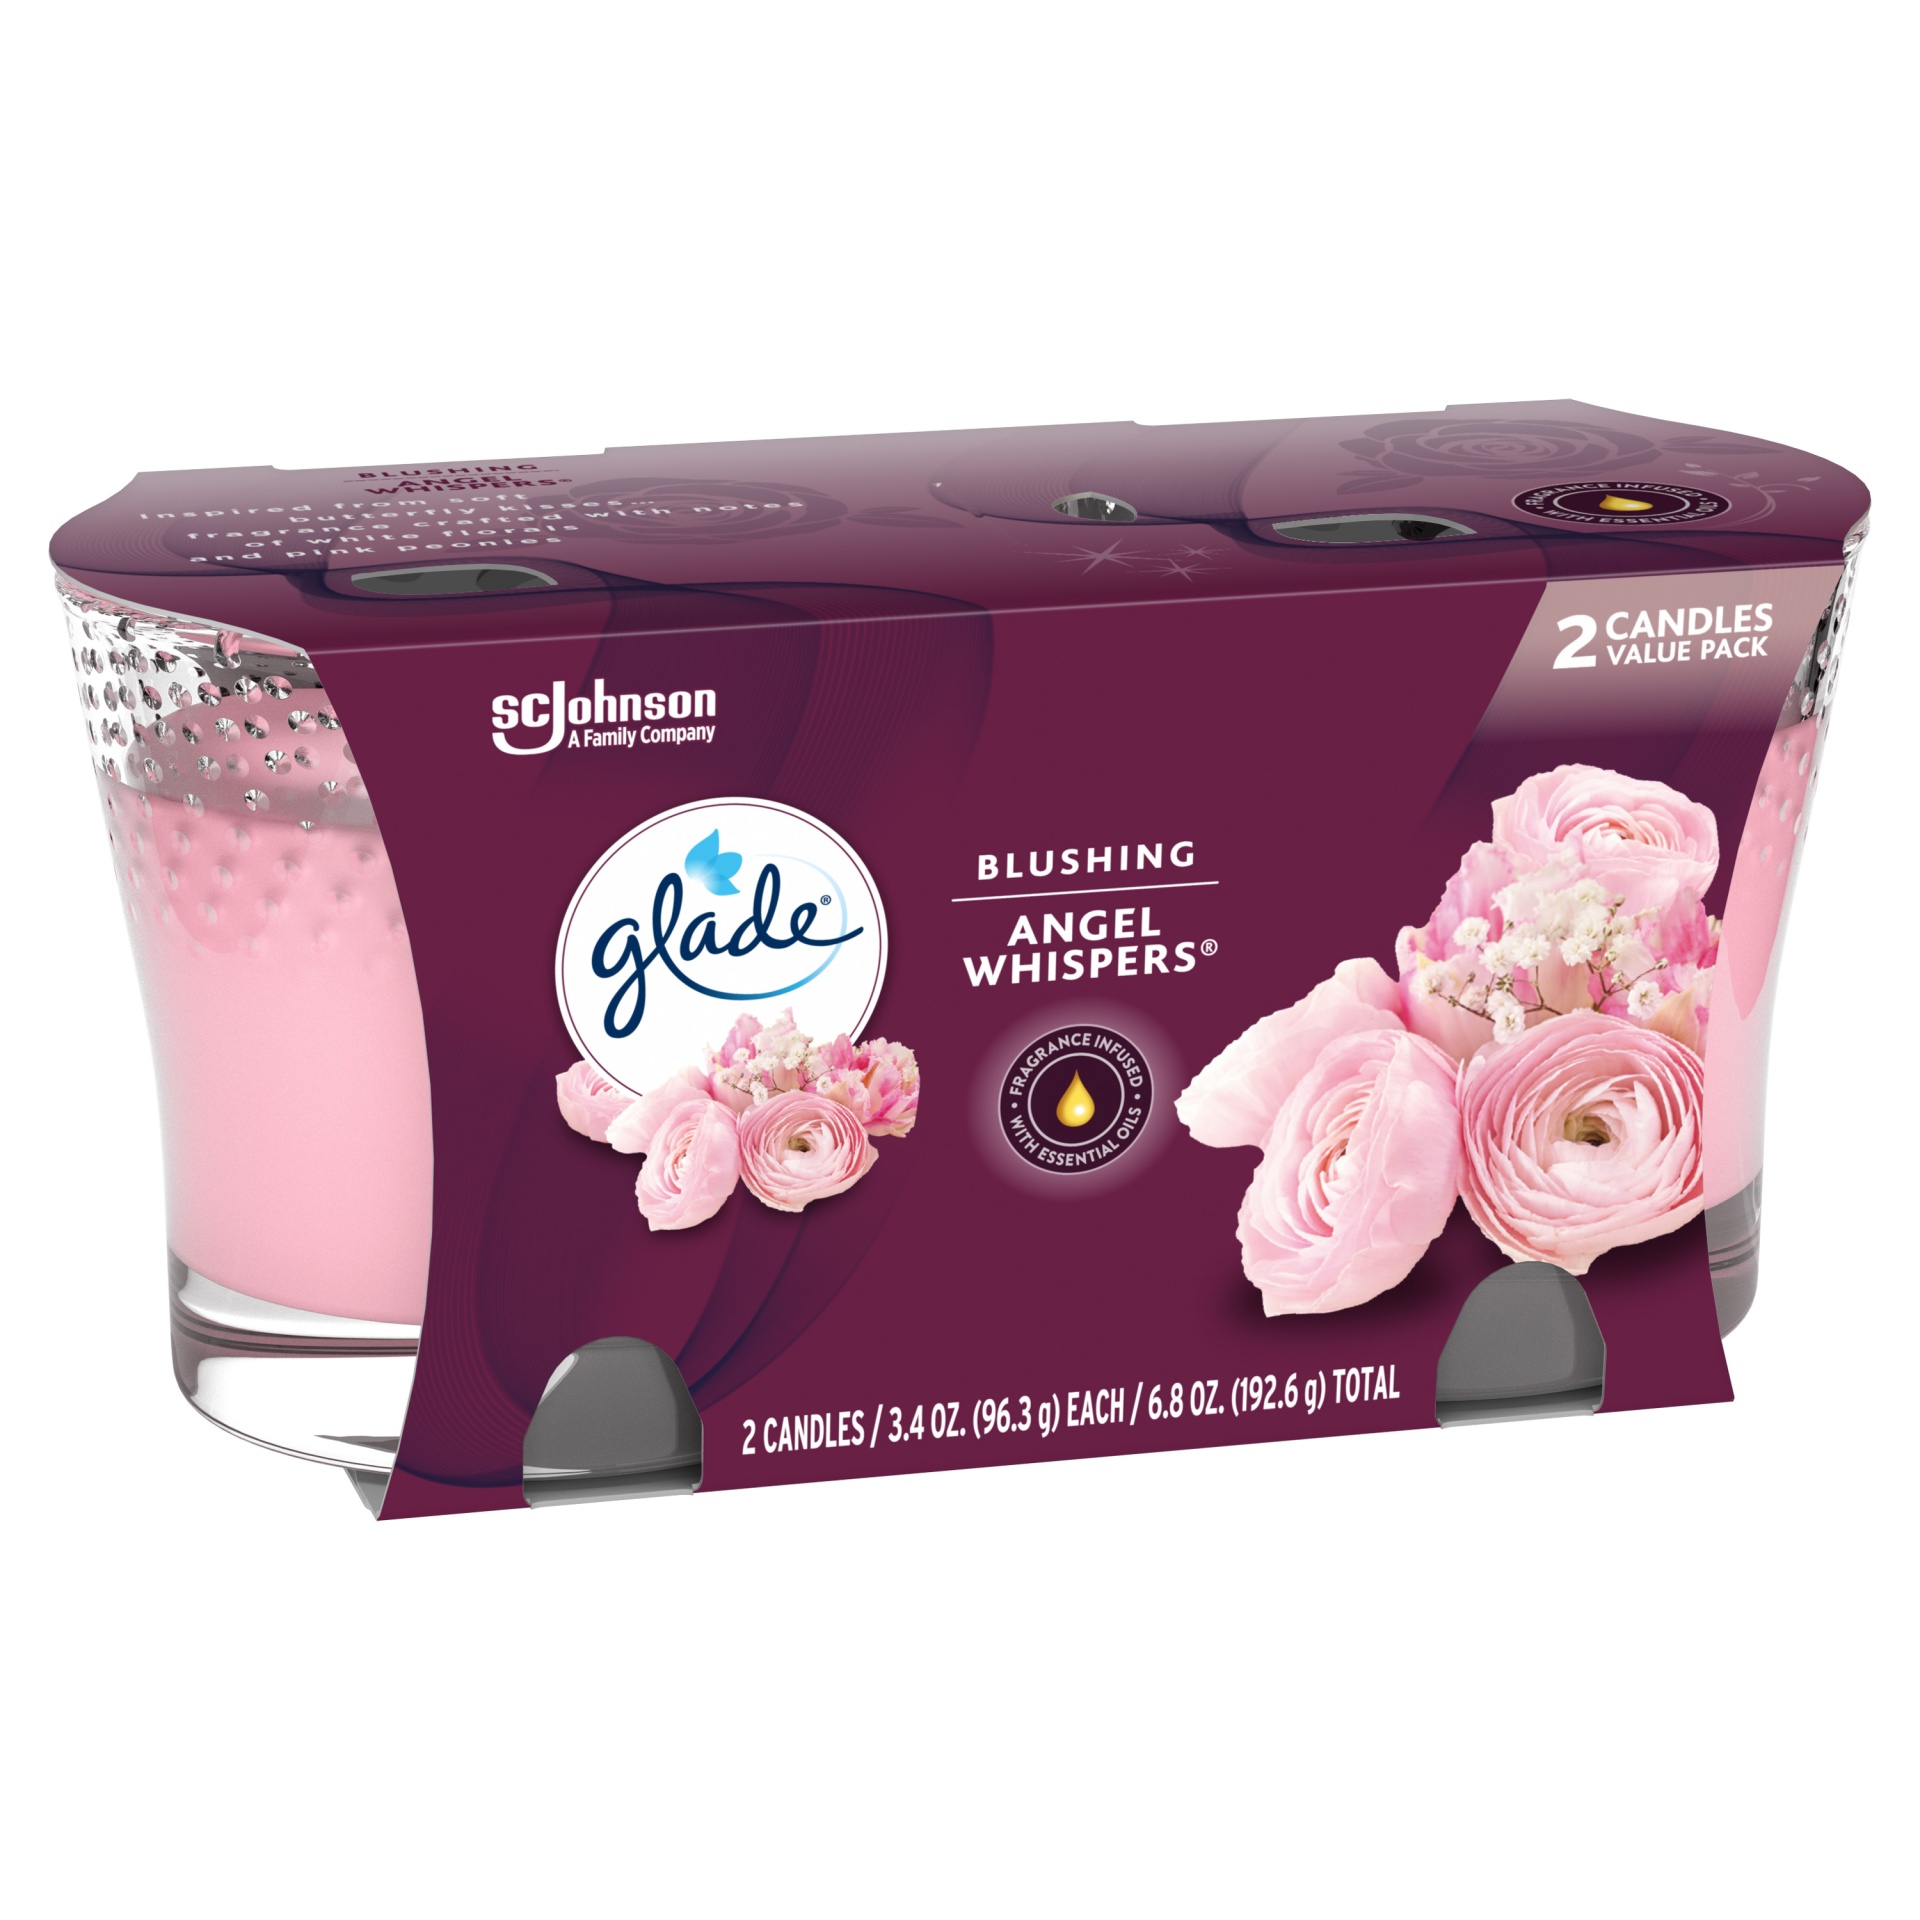 slide 4 of 6, Glade Candle Angel Whispers Scent, 1-Wick, 3.4 oz (96.3 g) Each, 2 Counts, Fragrance Infused with Essential Oils, Notes of Bulgarian Rose, Peach, White Floral Bouquet, Lead-Free Wick Scented Candles, 2 ct; 3.4 oz